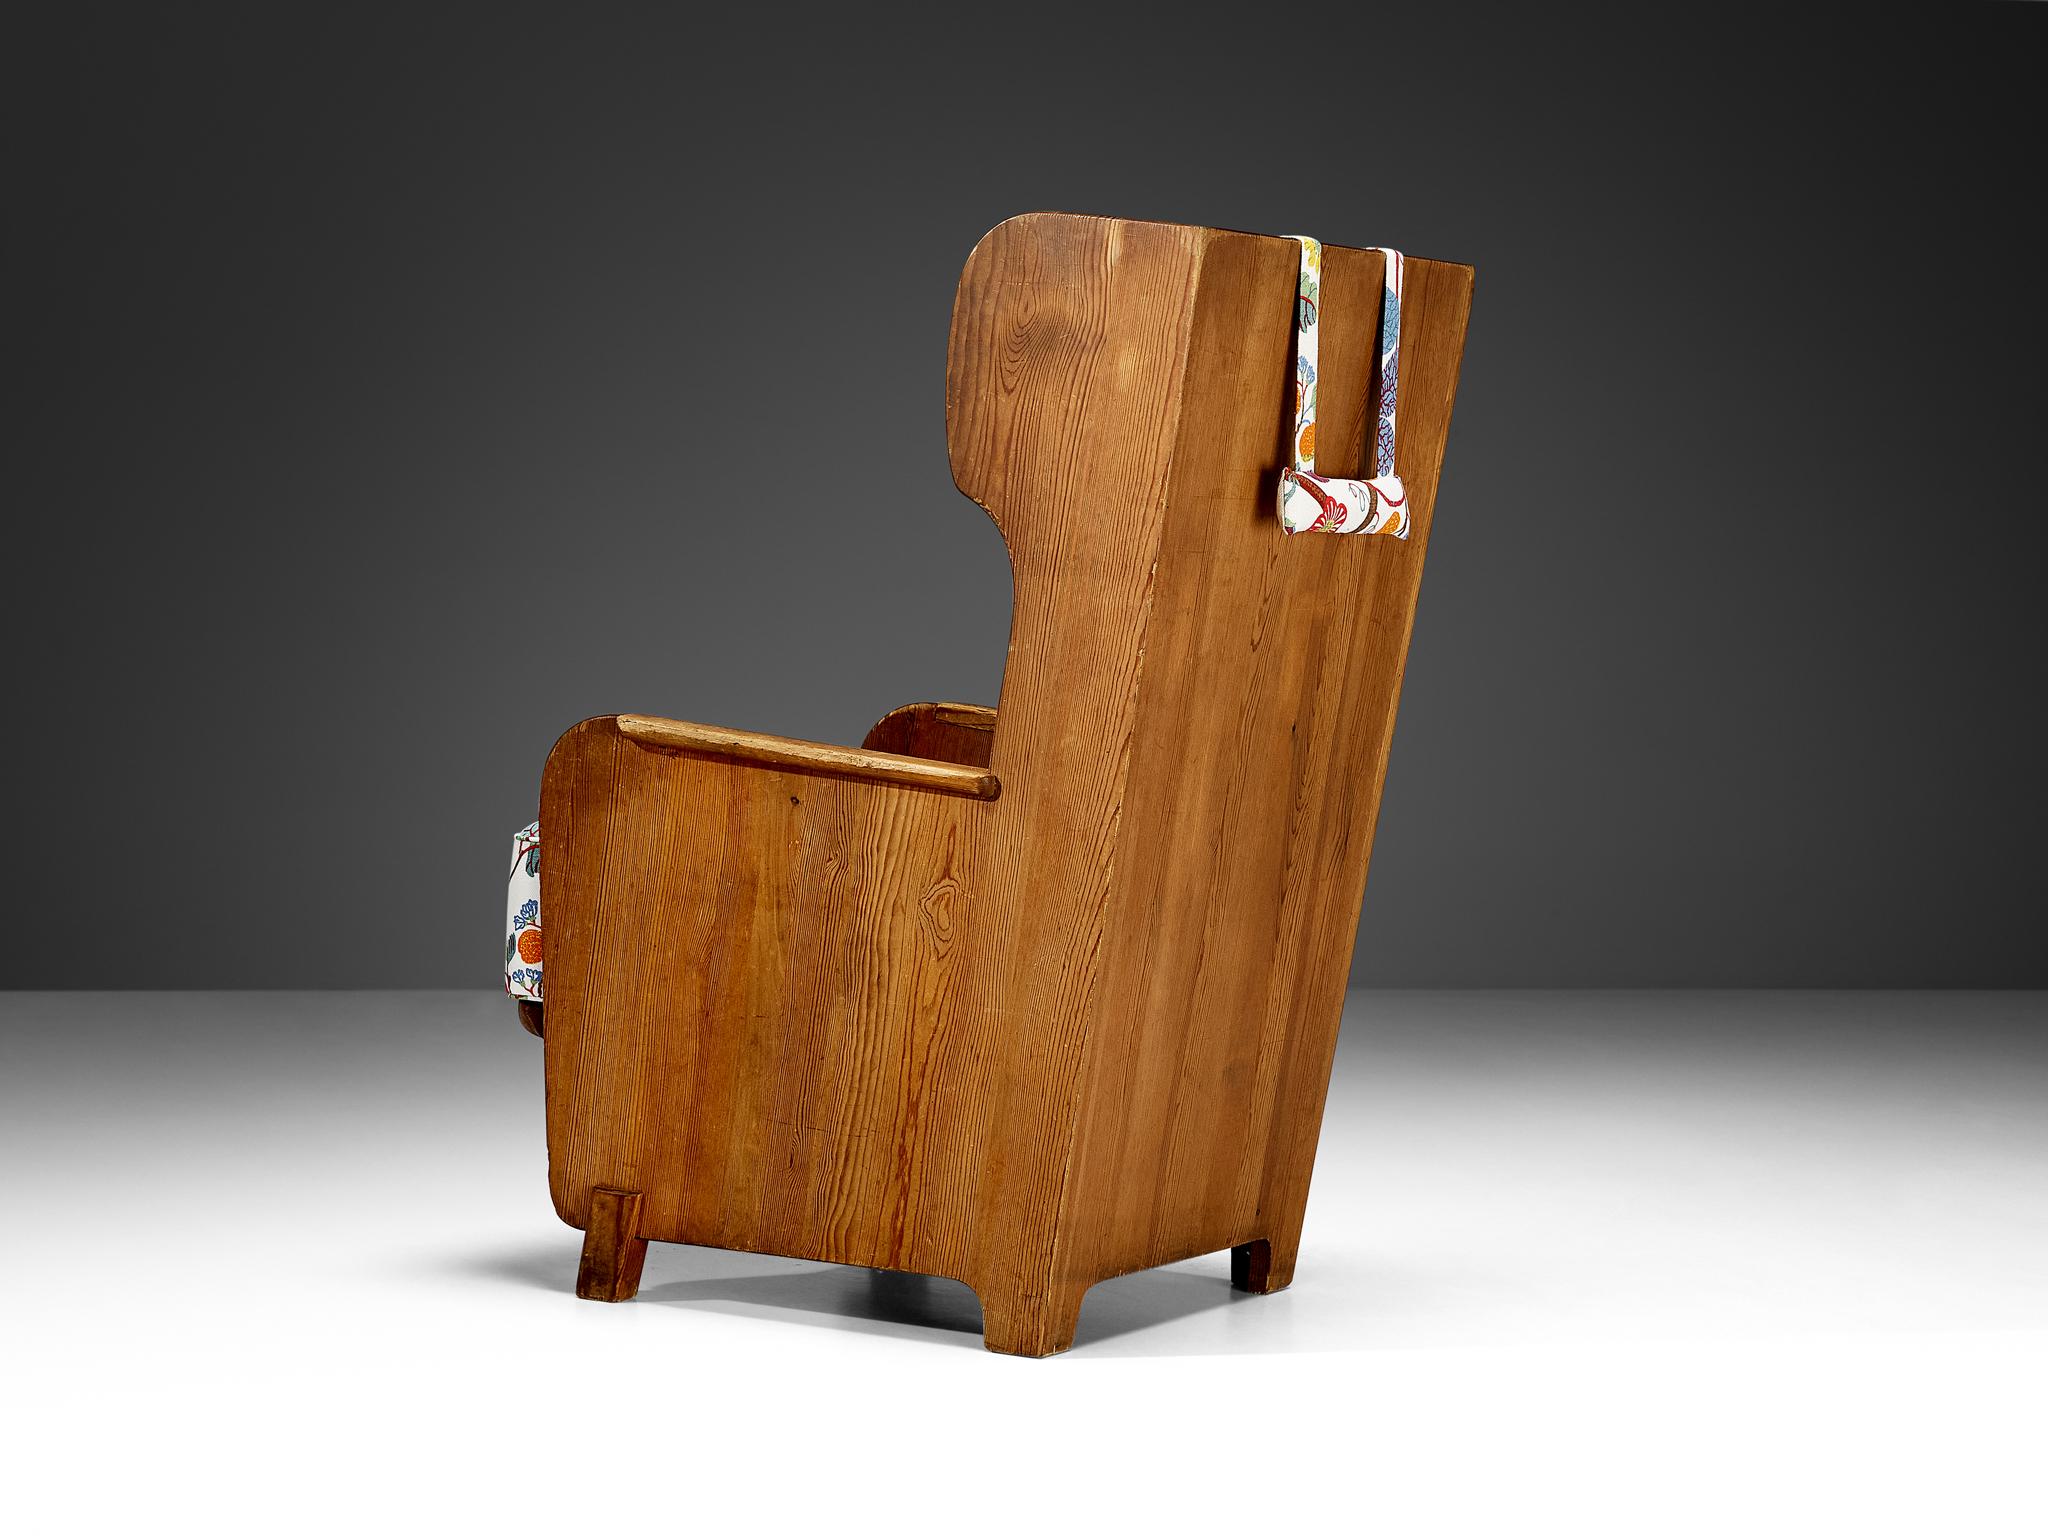 Axel Einar Hjorth 'Lovö' Lounge Chair in Solid Pine  For Sale 1